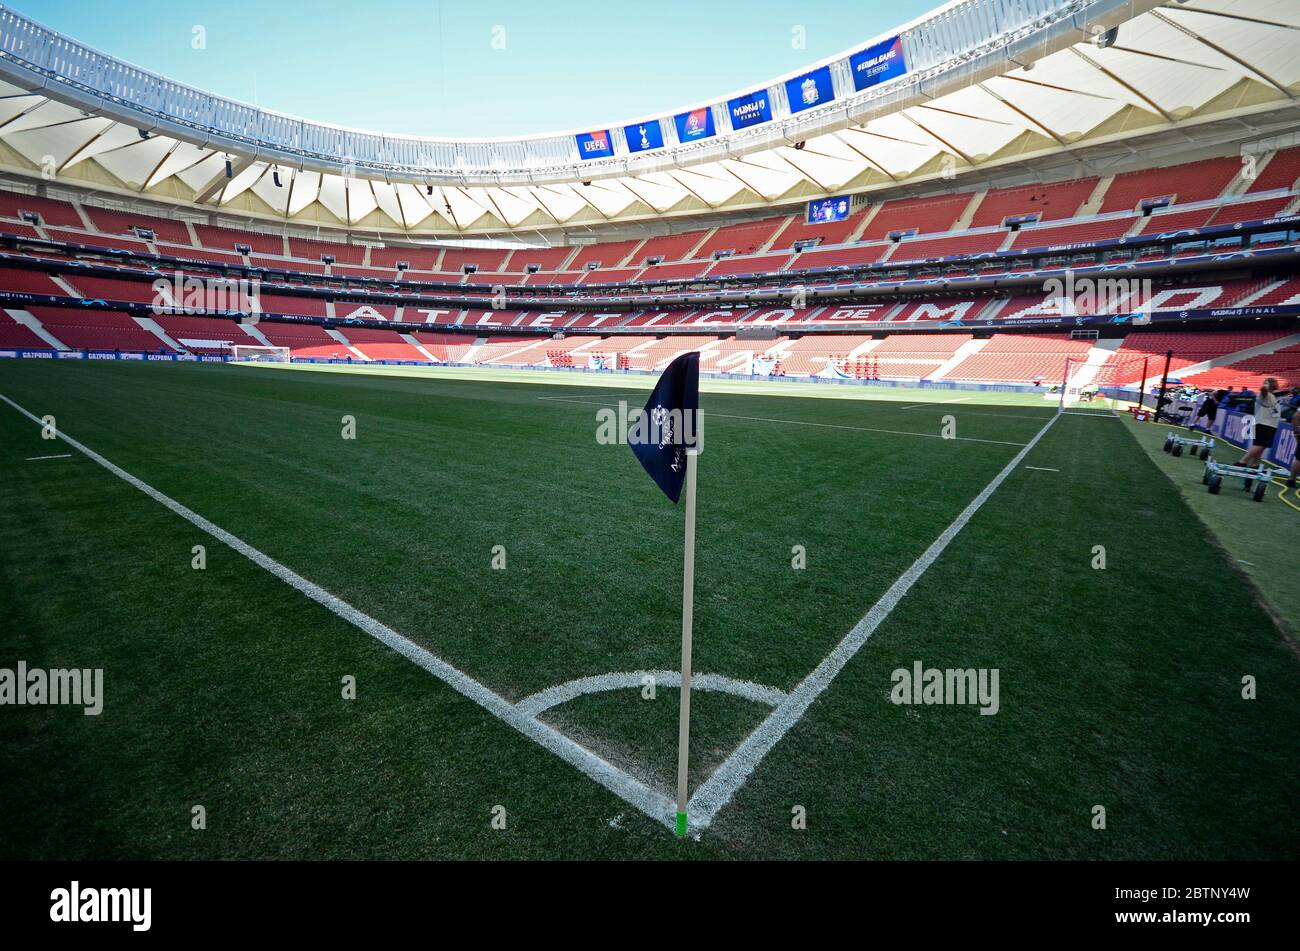 Uefa Champions League Final High Resolution Stock Photography and Images -  Alamy